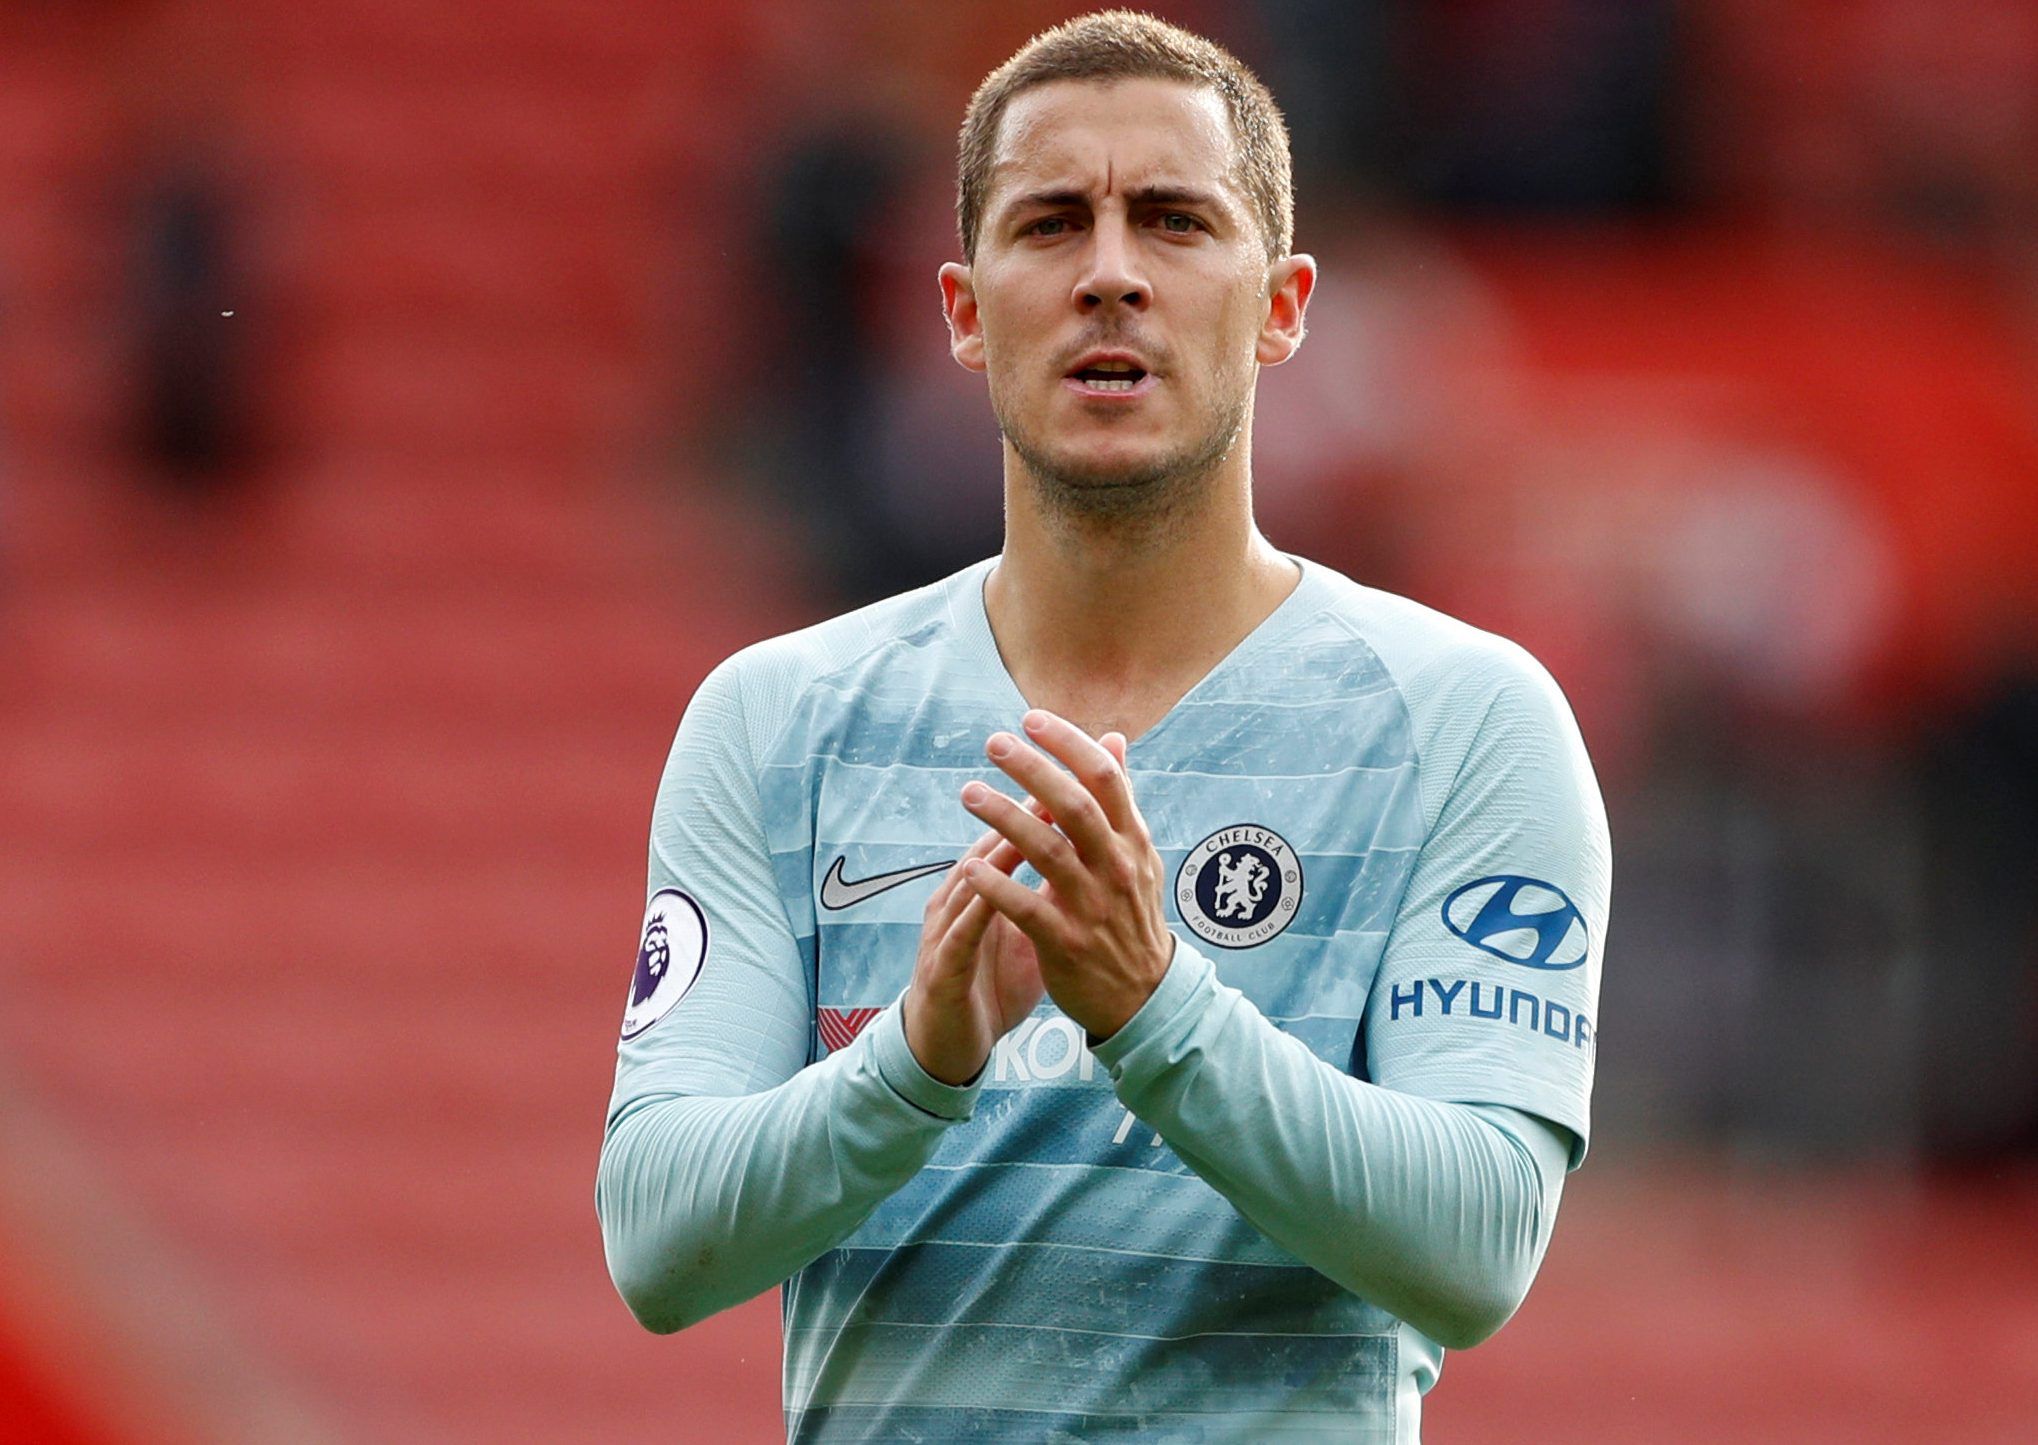 Soccer Football - Premier League - Southampton v Chelsea - St Mary's Stadium, Southampton, Britain - October 7, 2018  Chelsea's Eden Hazard celebrates after the match                Action Images via Reuters/John Sibley  EDITORIAL USE ONLY. No use with unauthorized audio, video, data, fixture lists, club/league logos or 